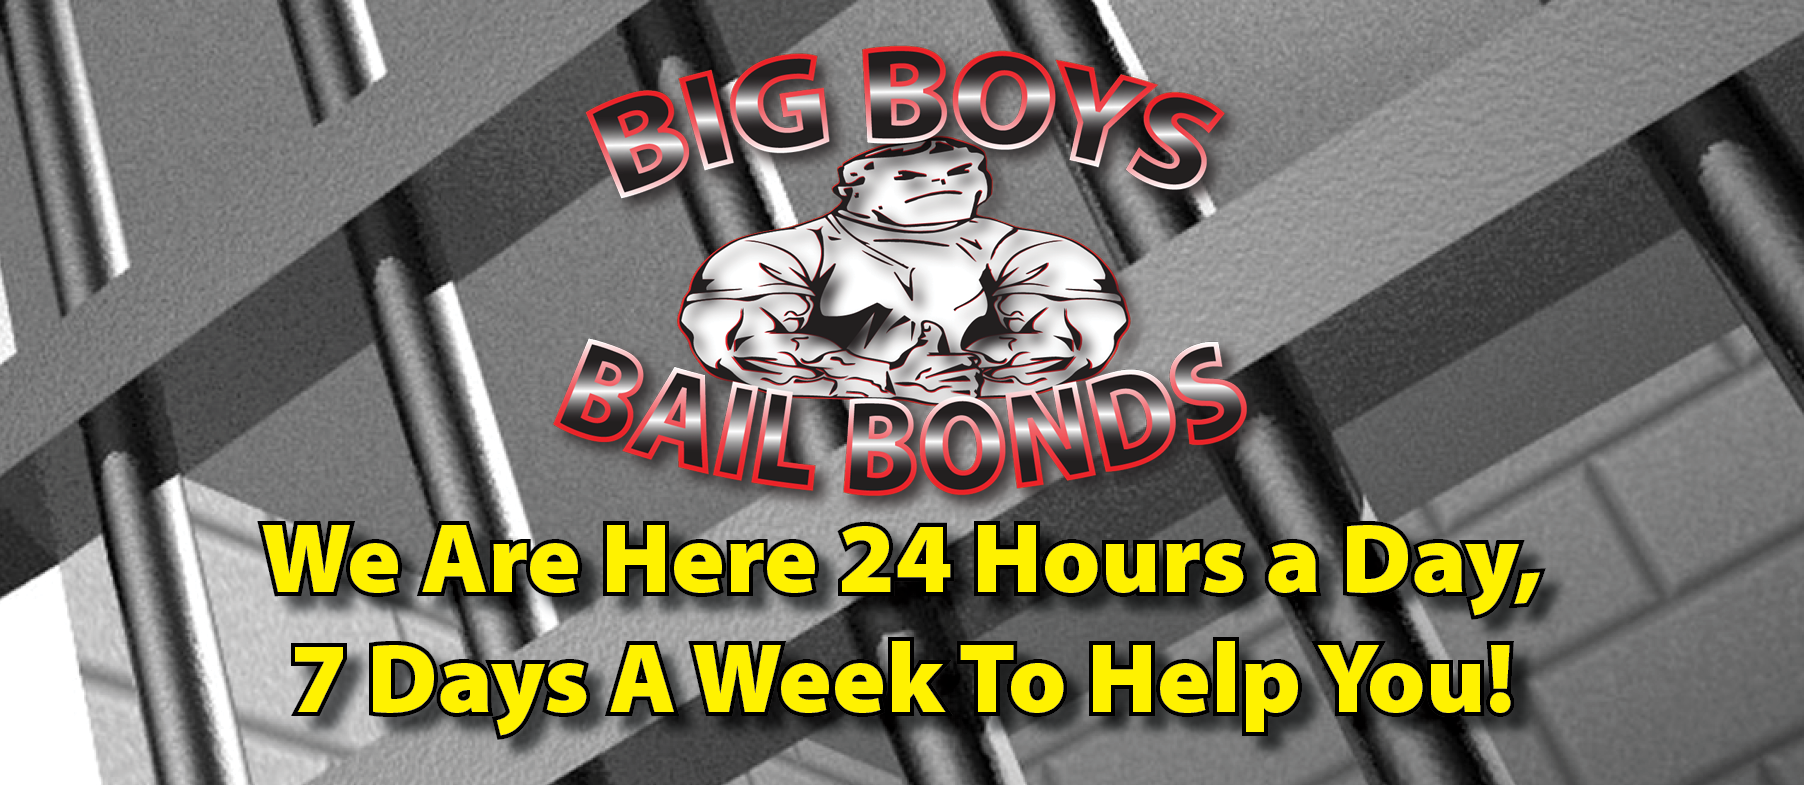 Affordable Bail, Quick Bail, Reliable Bail Service, Big Boys Bail Bonds Is There 24 Hours A Day When You Need Us, Call Us FIRST!, Judge Set The Bail, Bail Set Now What?, Who Can Bail Me Out?, How To Get Bail?, How Bail Bonds Work?, How Much Do Bail Bonds Cost?, Arrested and Need Bail?, In Jail, Need Bail, 24 Hours A Day Bail Bonds, Big Boys Bail Bonds, Your First Choice, Professional Bail Bondsman, Quick Release, Call Big Boys Bail Bonds 941 484-2663 (BOND)  FIRST! Best In Service At Time Of Need! "